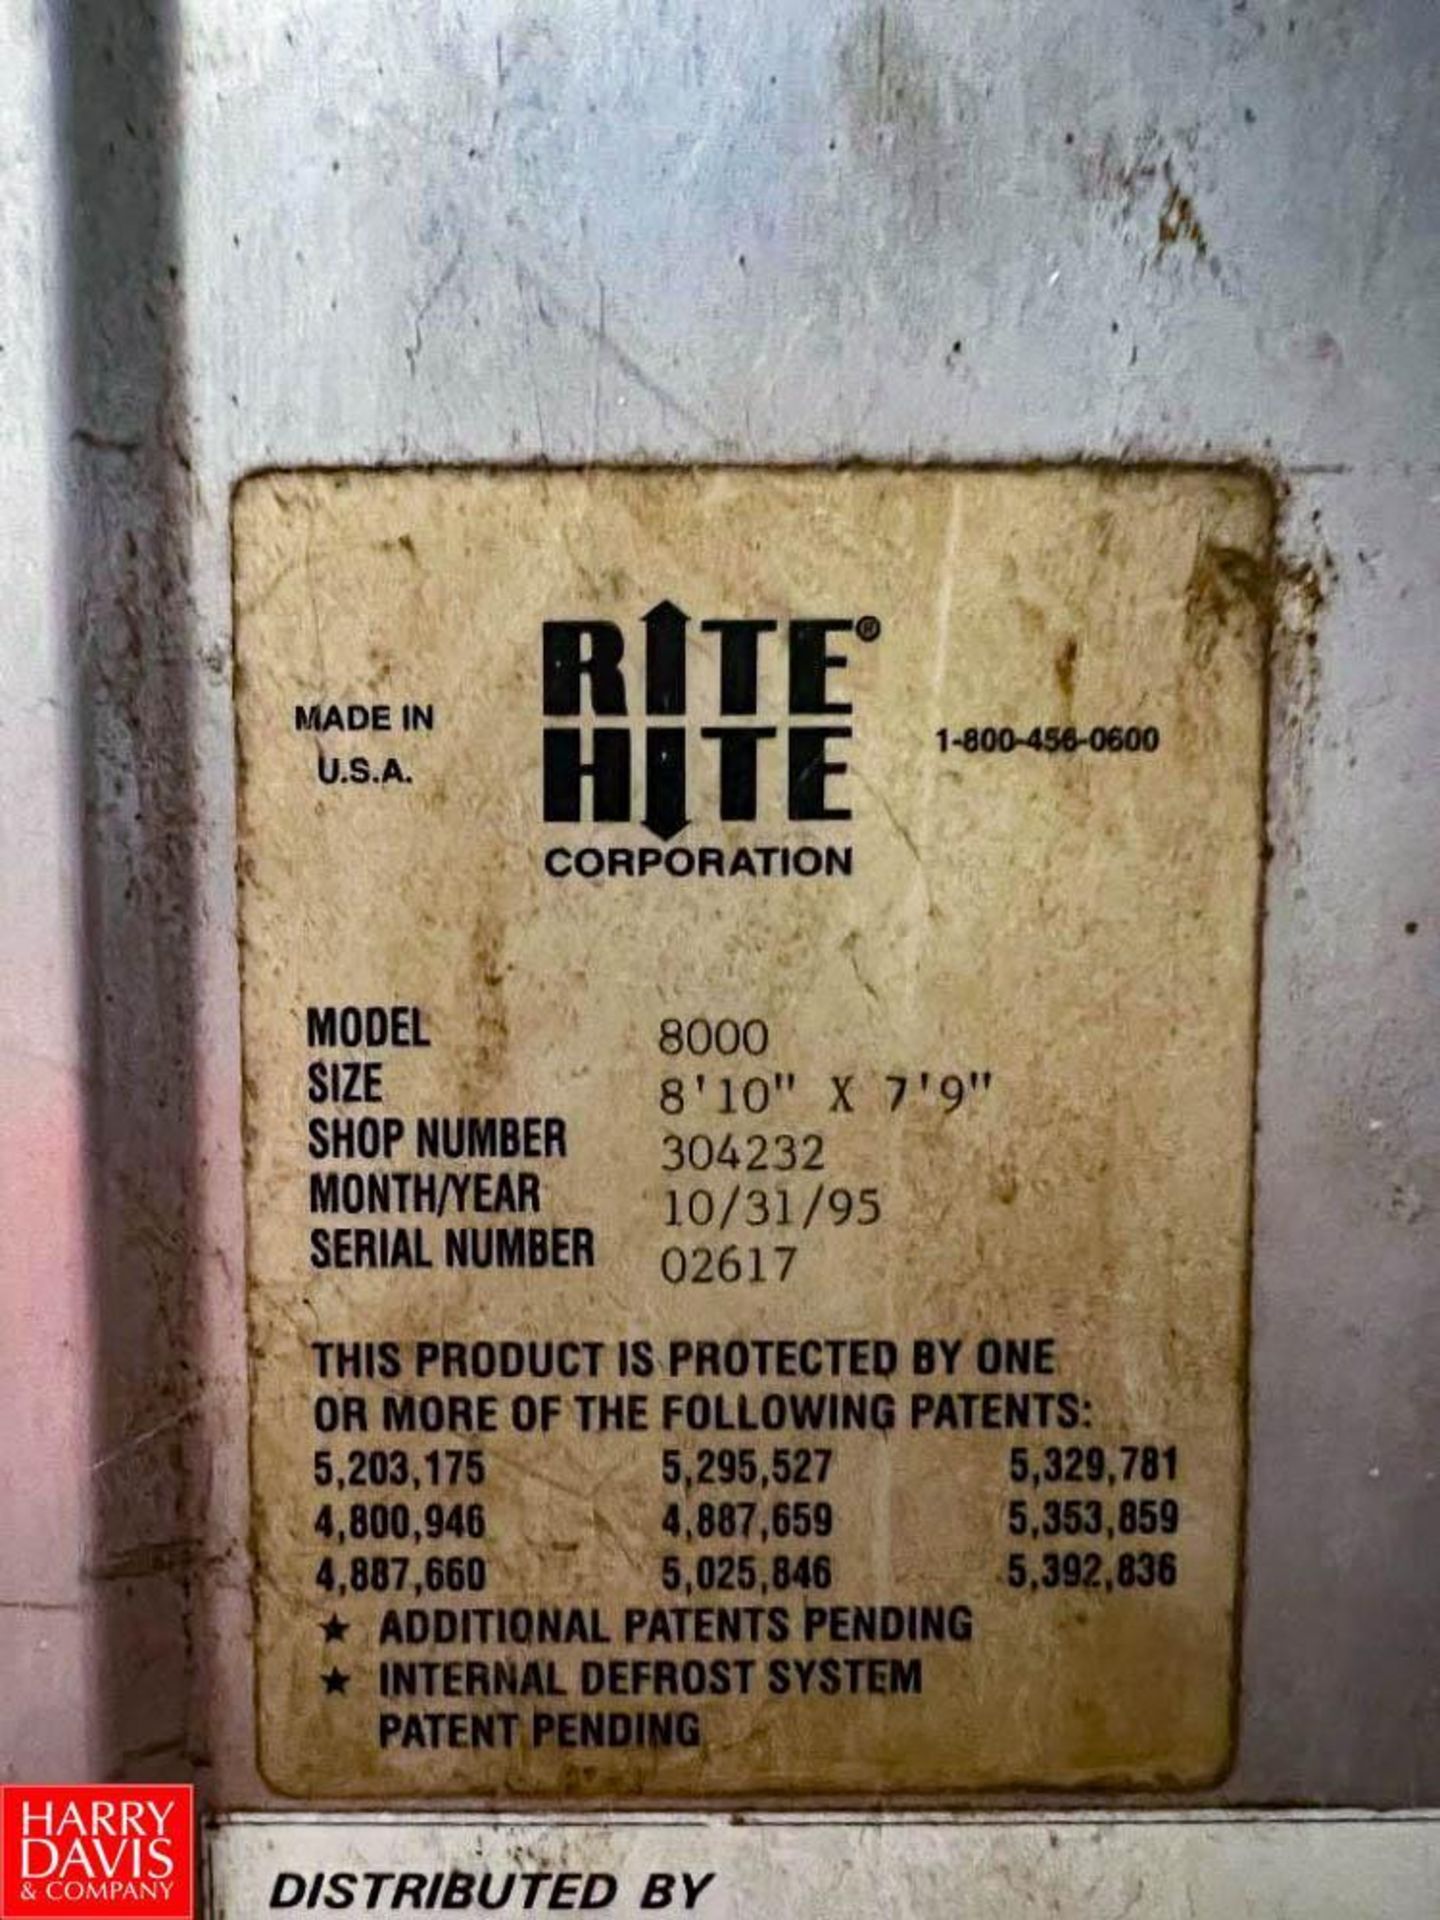 Rite Hite High Speed Roll-Up Door, Dimensions = 8'10" x 7'9" - Image 4 of 4